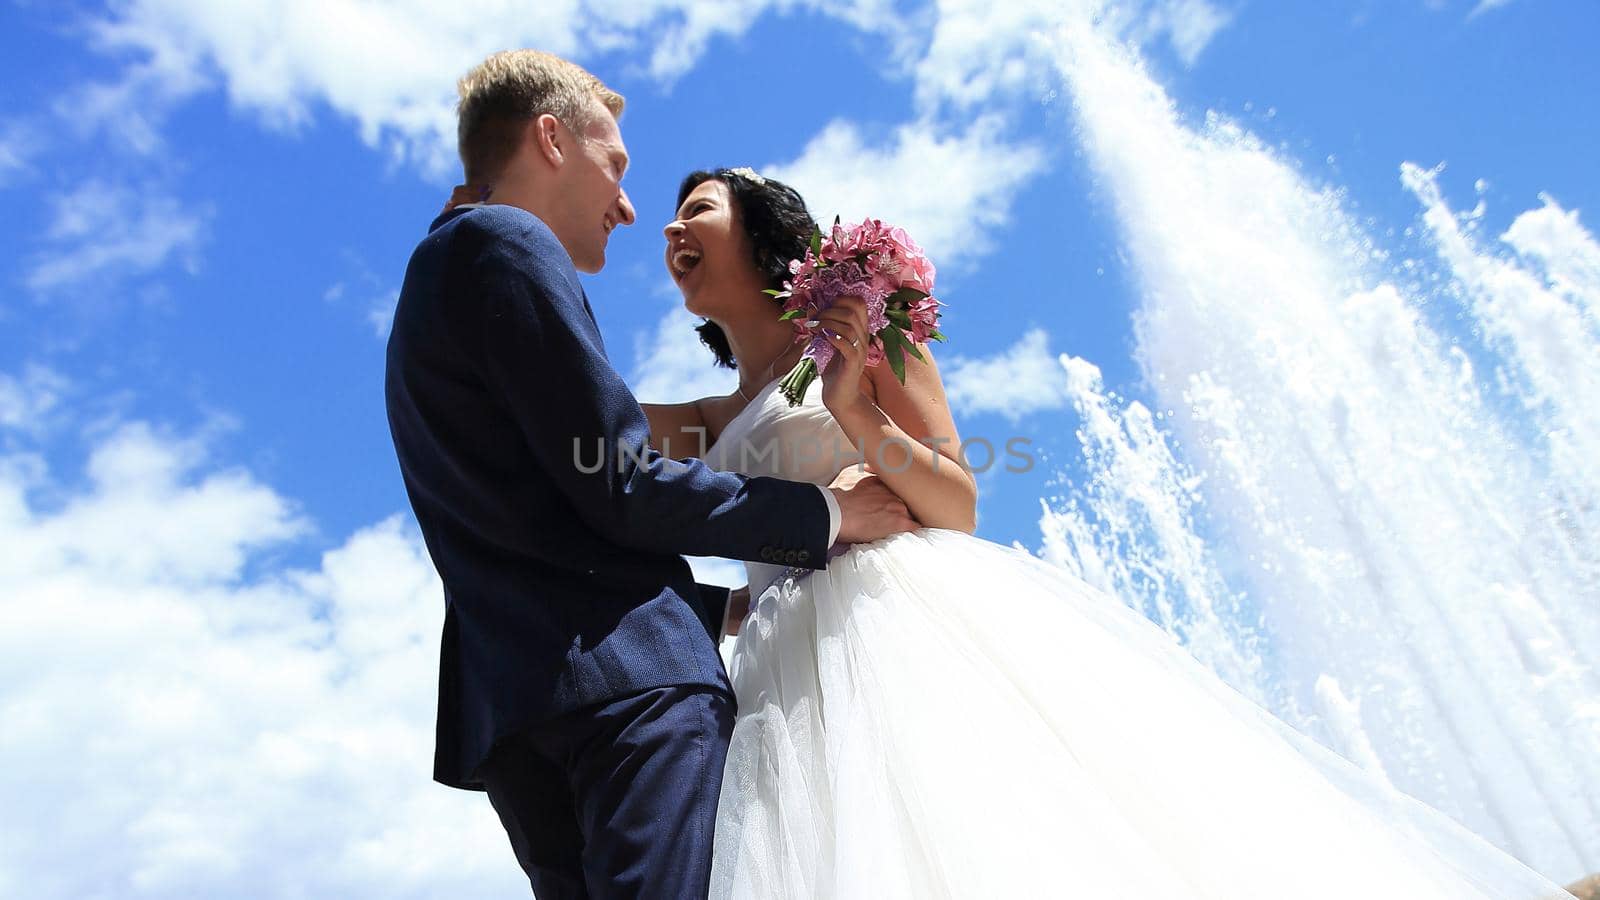 bride and groom on the background of the summer sky.photo with copy space